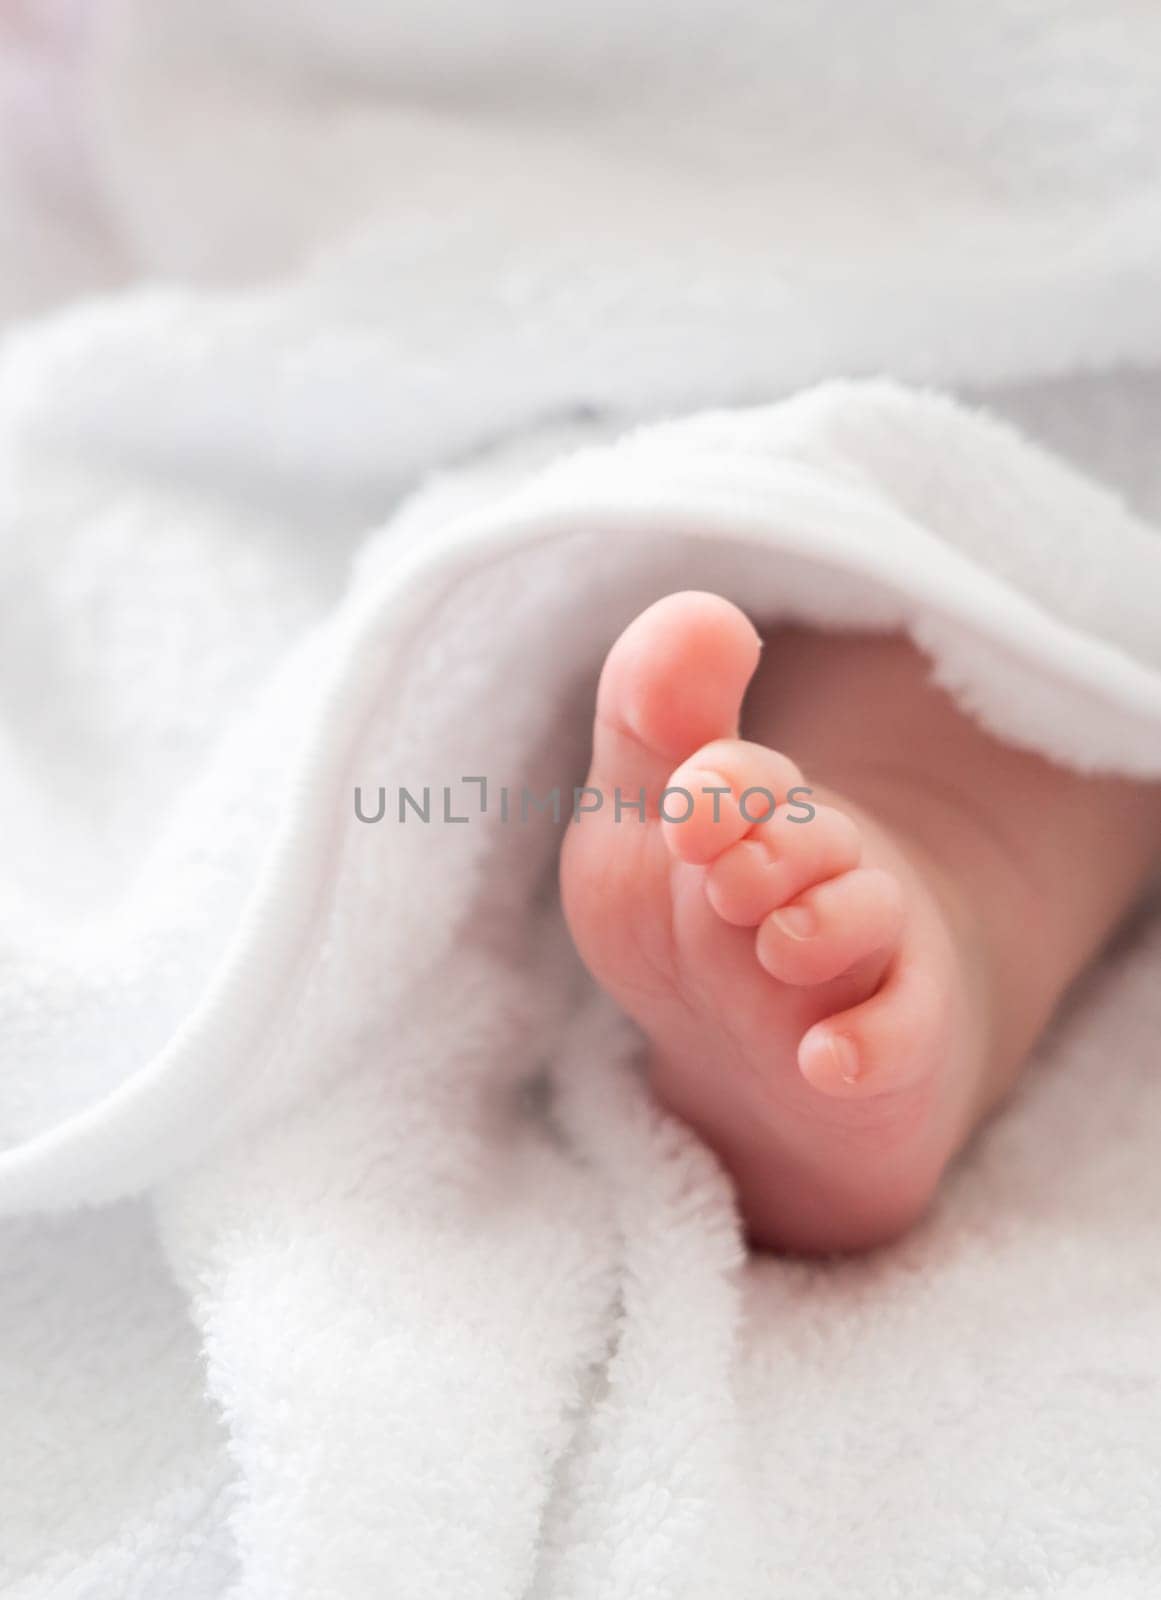 Baby's first steps: tiny foot unveiled from a white towel by Mariakray